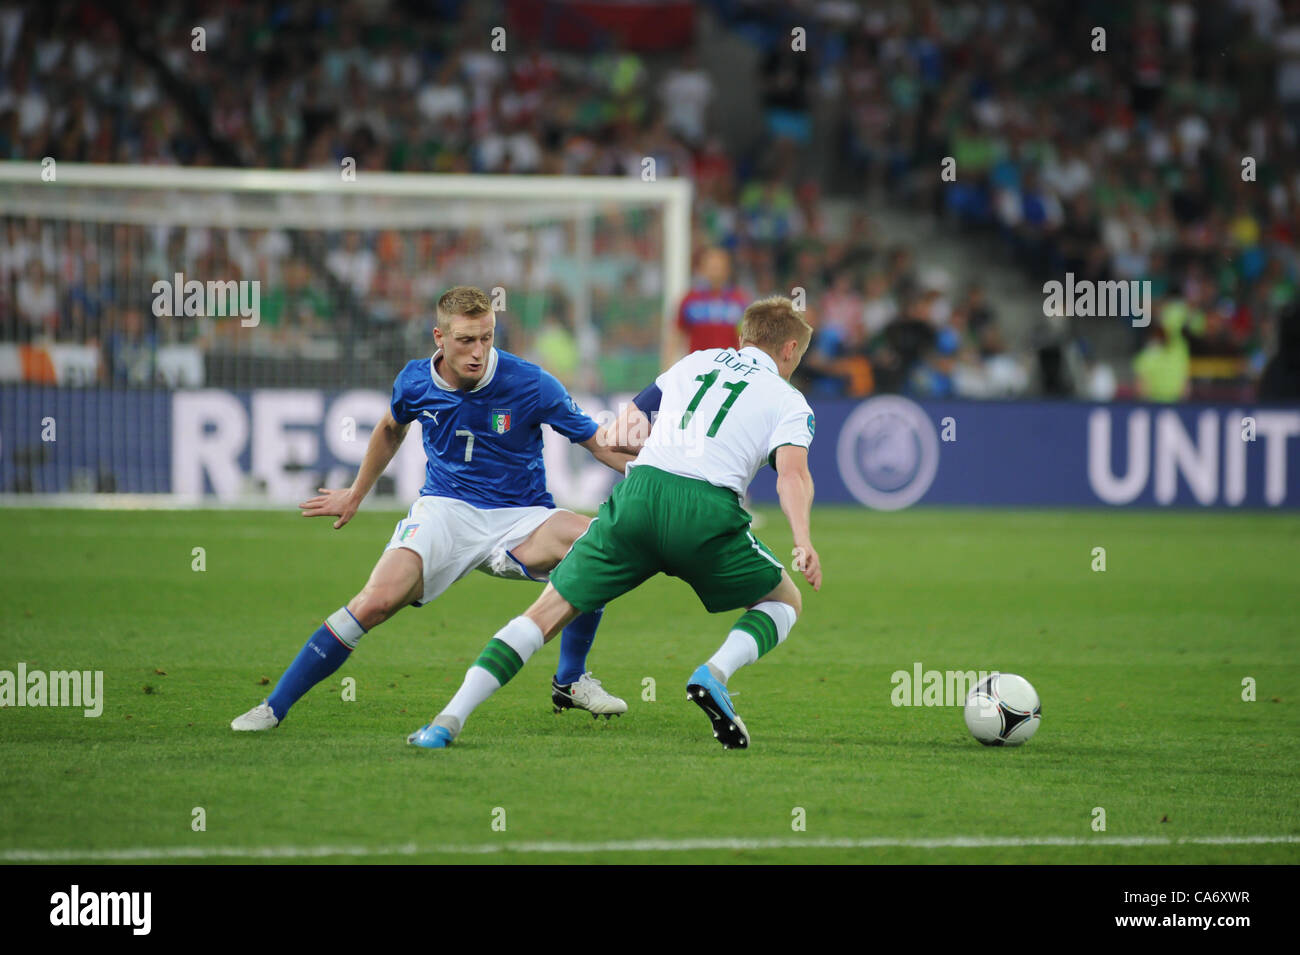 18.06.2012 , Poznan, Poland.Damien Duff (Fulham FC) in action for Rep of Ireland and Ignazio Abate (AC Milan) in action for Italy during the European Championship Group C game between Italy and Ireland from the Municipal Stadium. Stock Photo